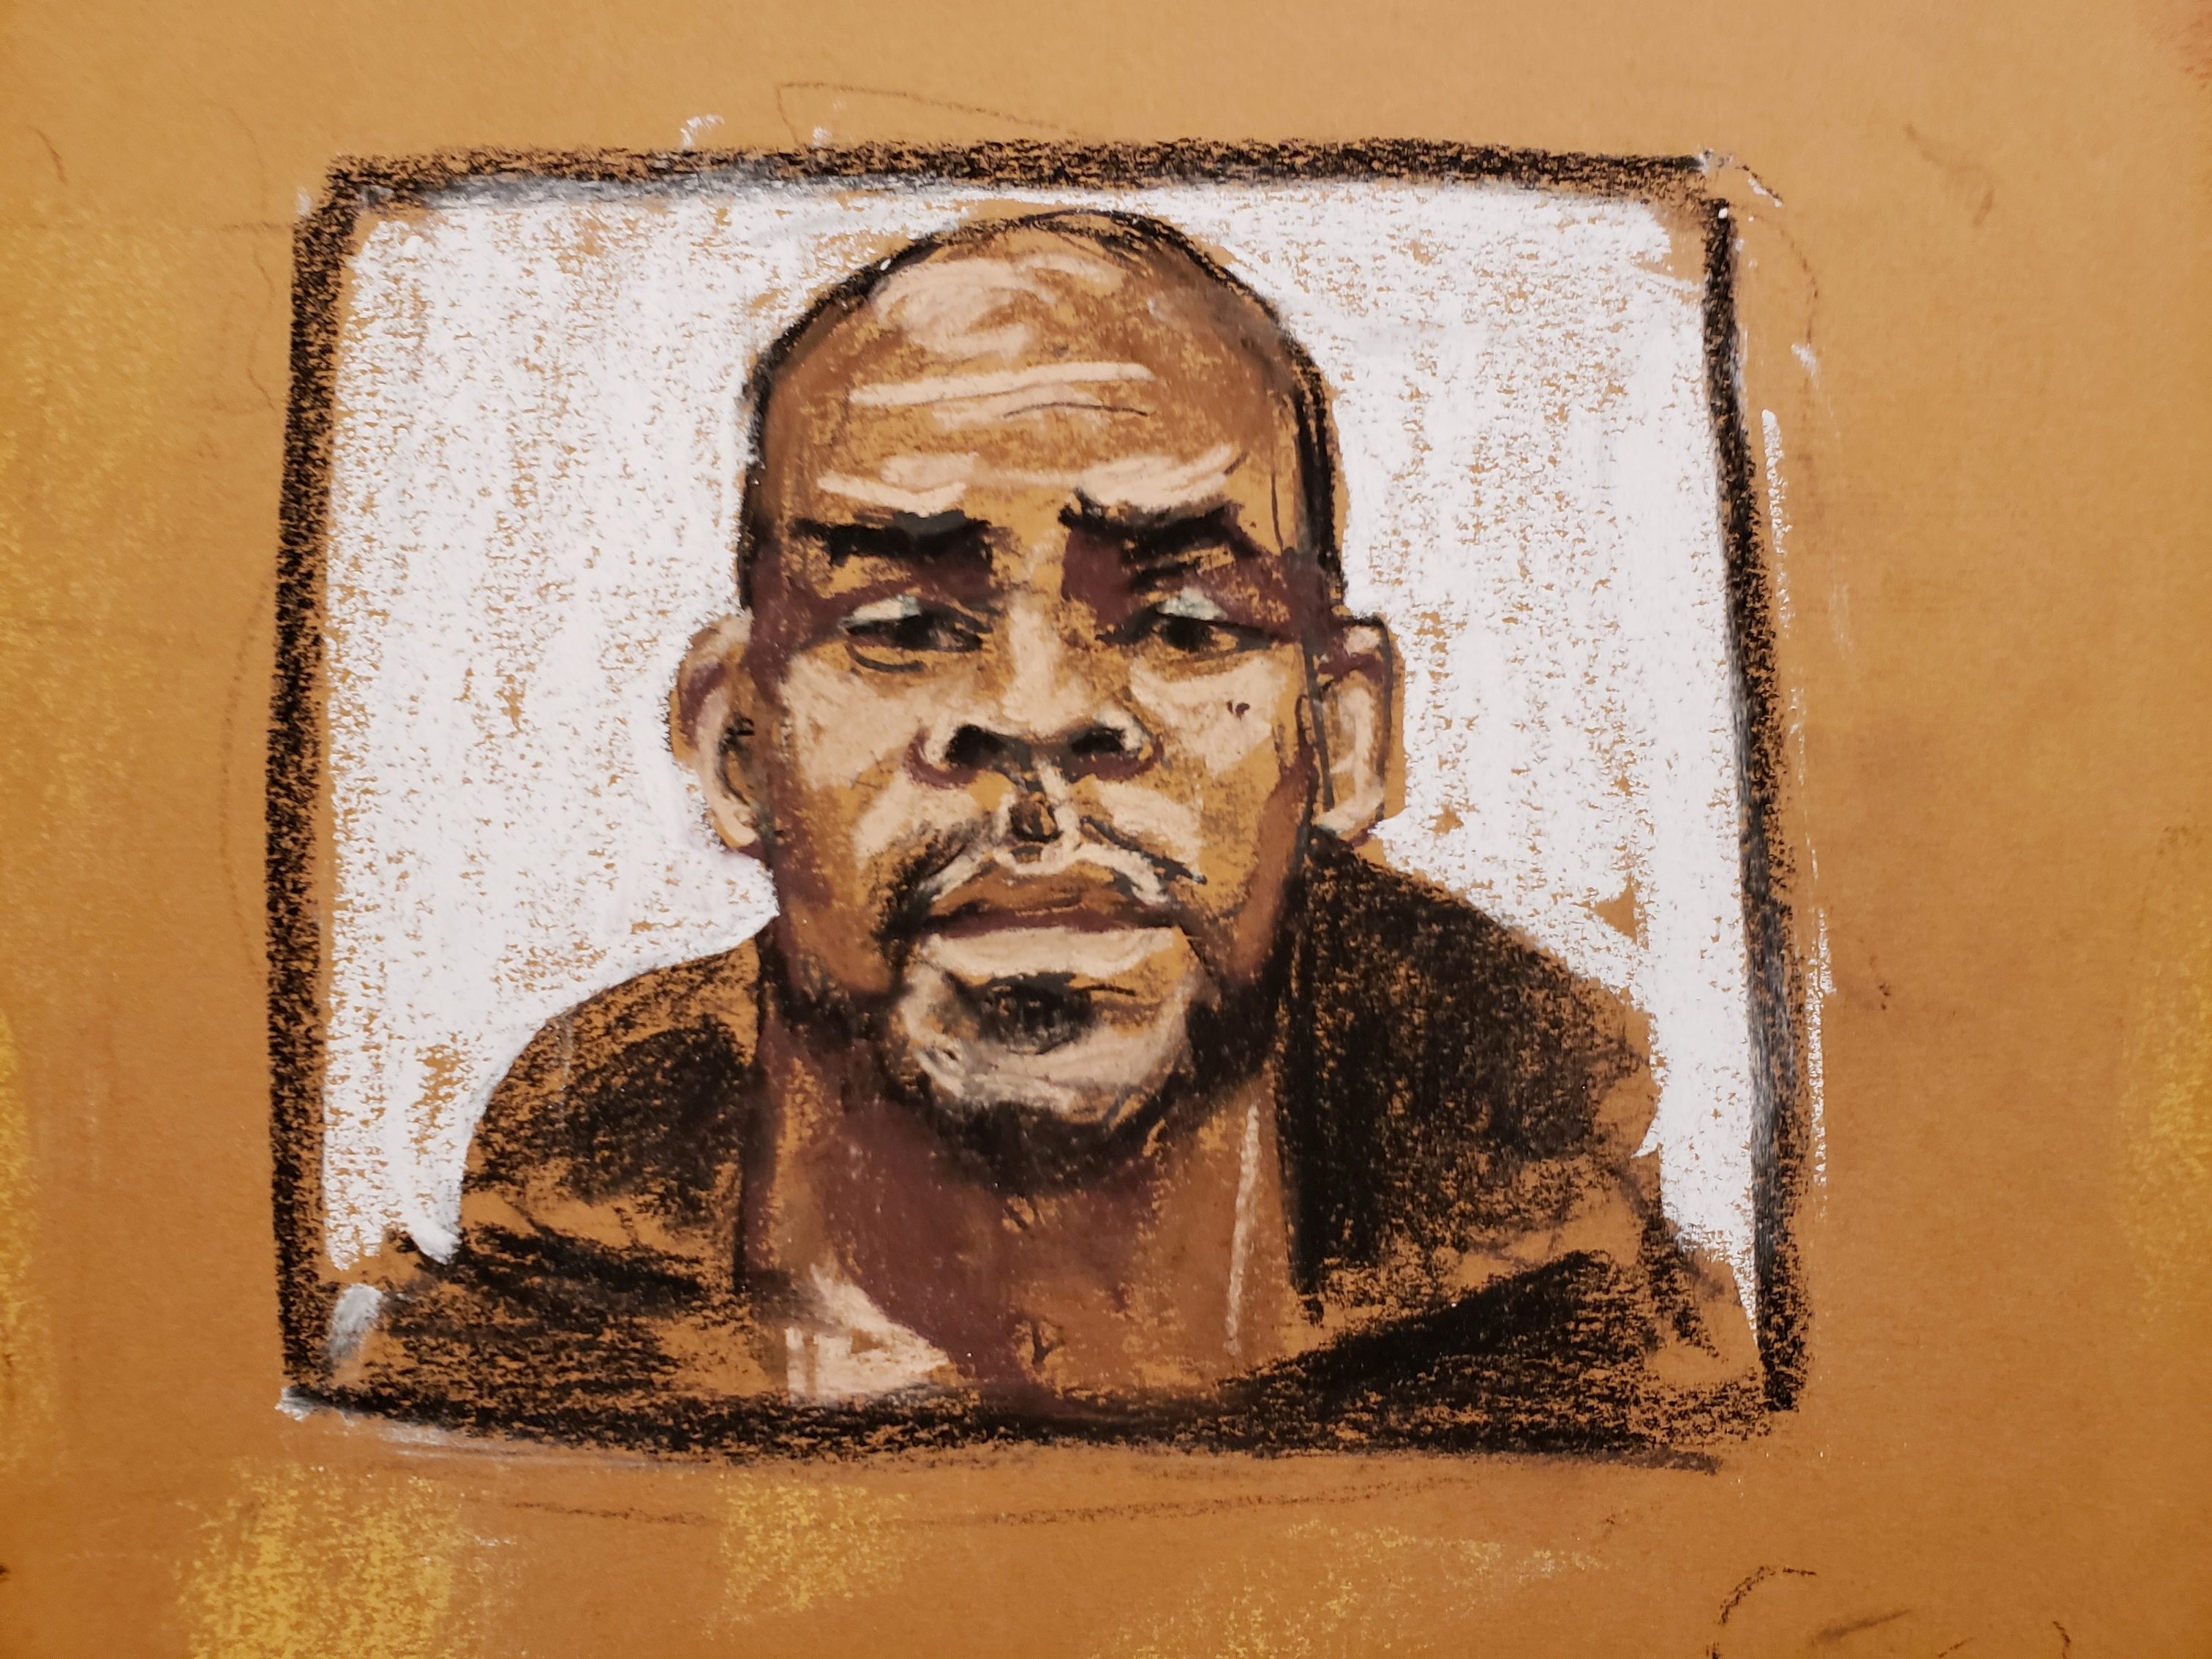 Relief and disbelief greet R. Kelly guilty verdict